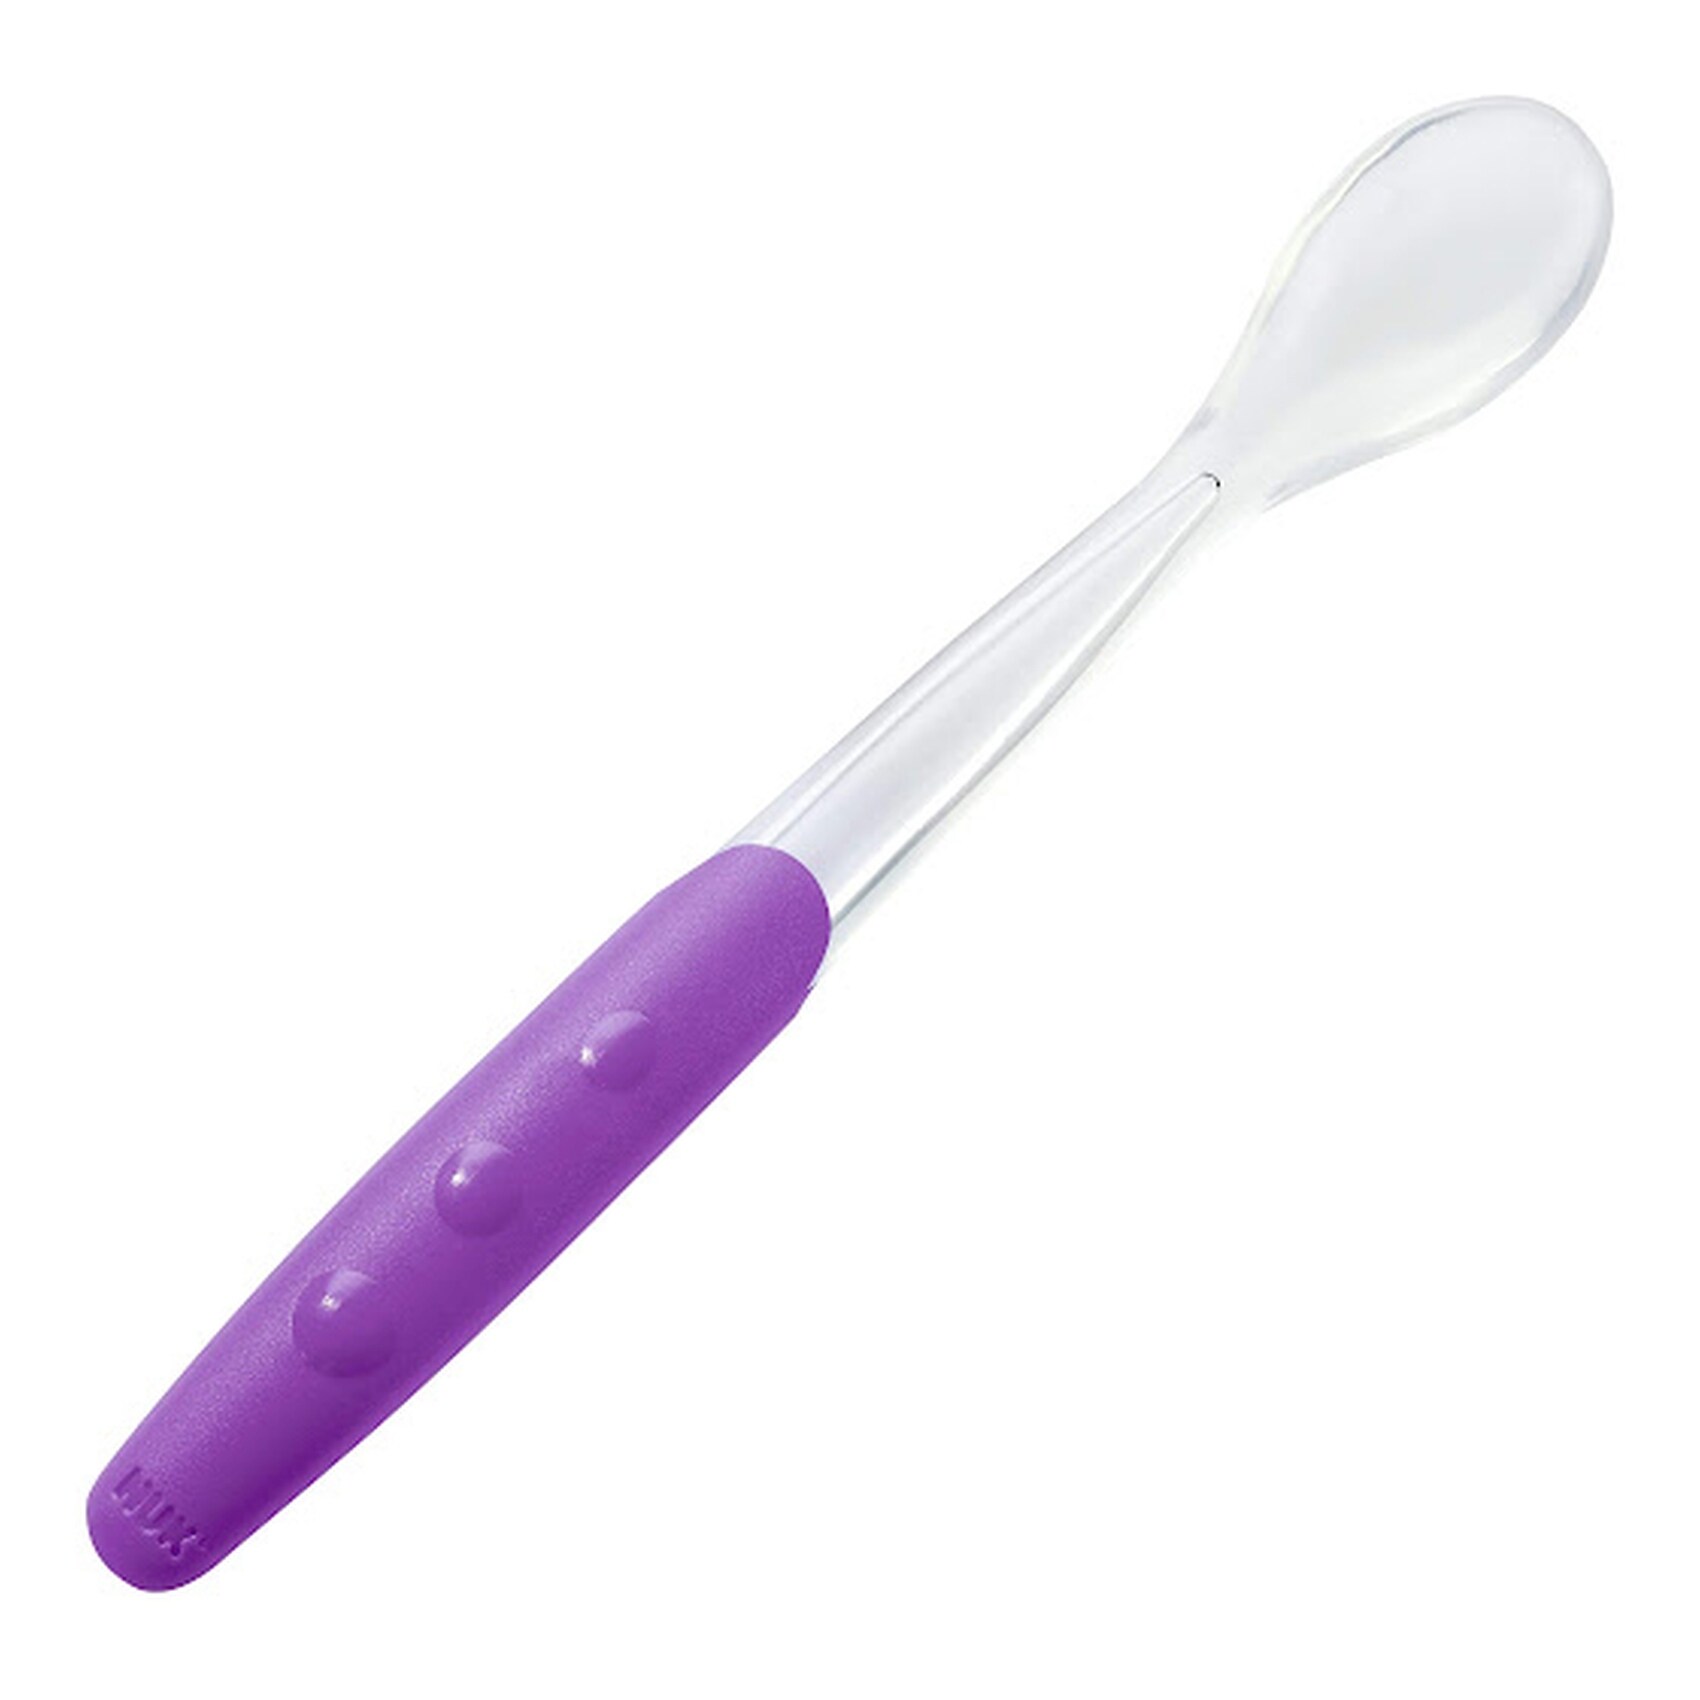 Purchase Nuk Soft Baby Feeding Spoon, 4m+, 10255065 Online at Special Price  in Pakistan 